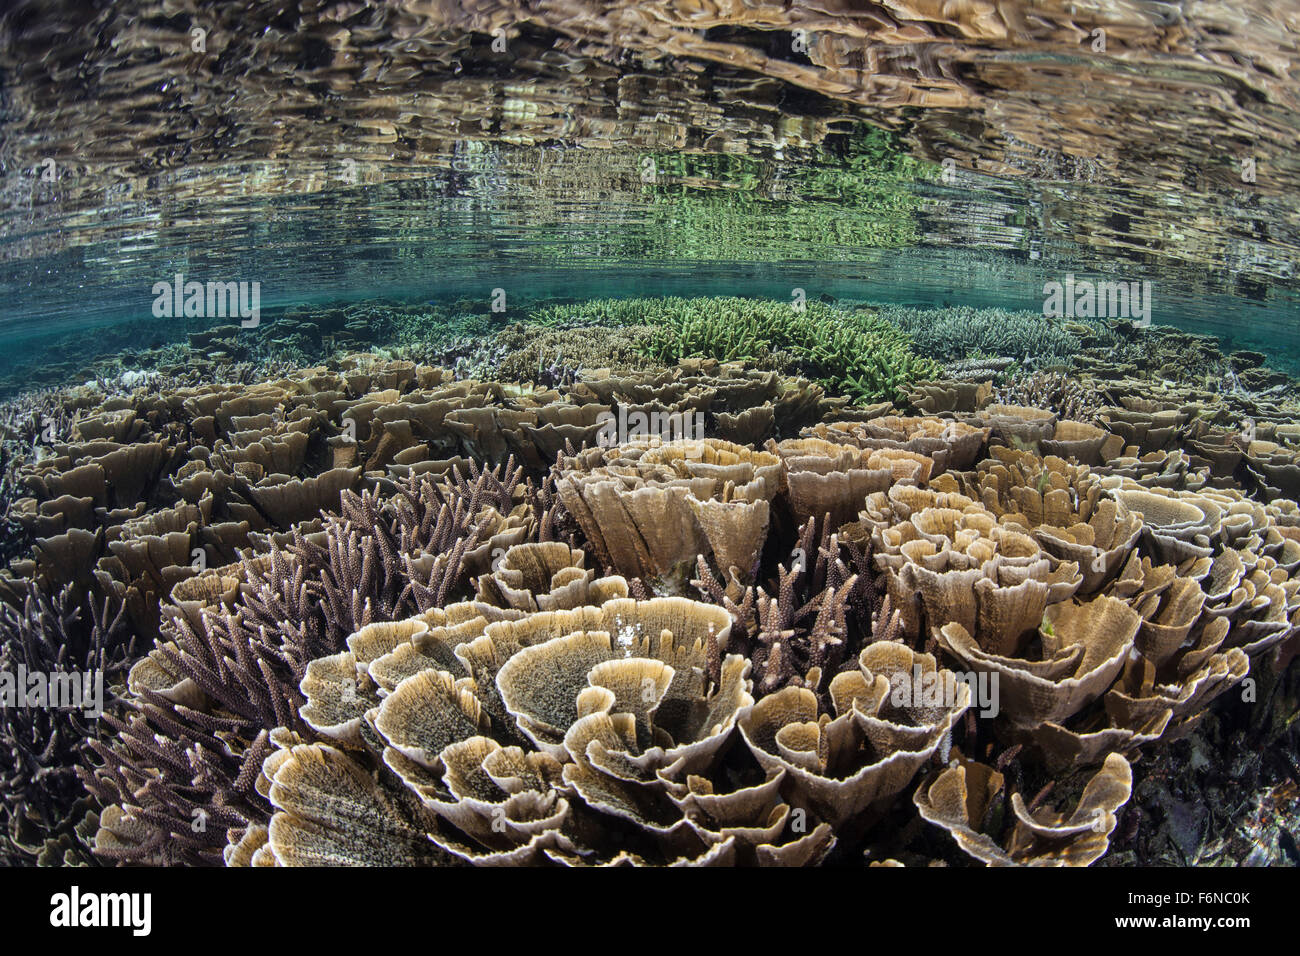 Fragile corals grow in extremely shallow water in Komodo National Park, Indonesia. This part of the Coral Triangle is known for Stock Photo